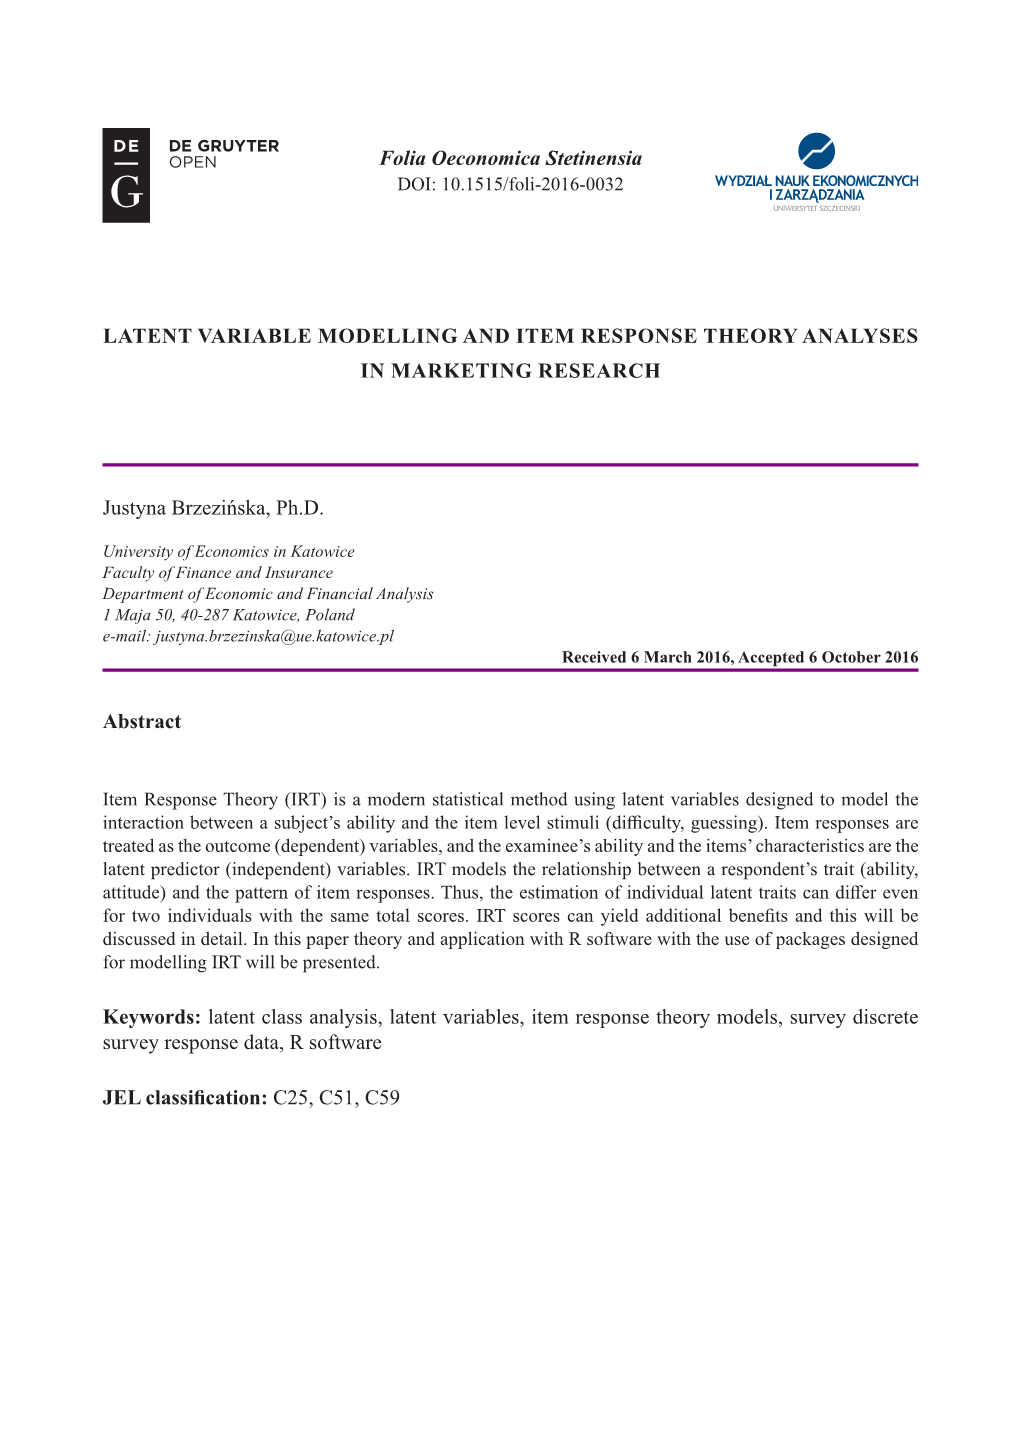 LATENT VARIABLE MODELLING and ITEM RESPONSE THEORY ANALYSES in MARKETING RESEARCH Justyna Brzezińska, Ph.D. Abstract Keywords